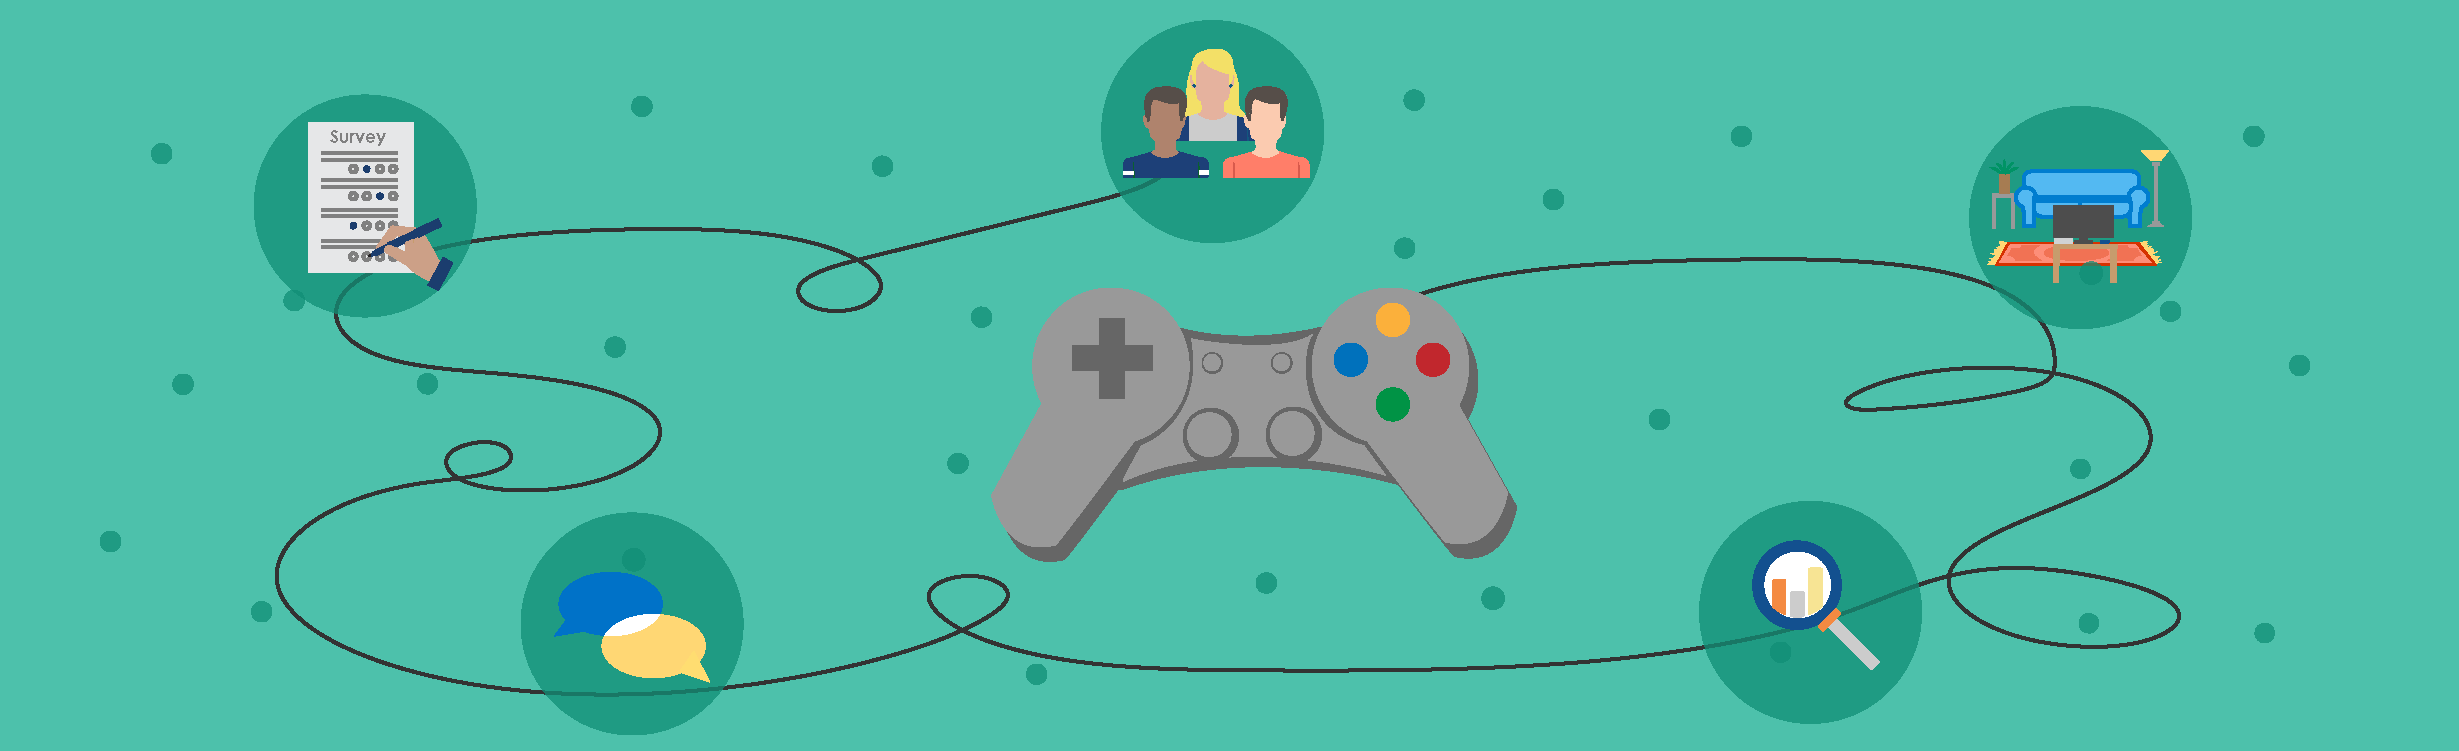 Games User Research For Developers